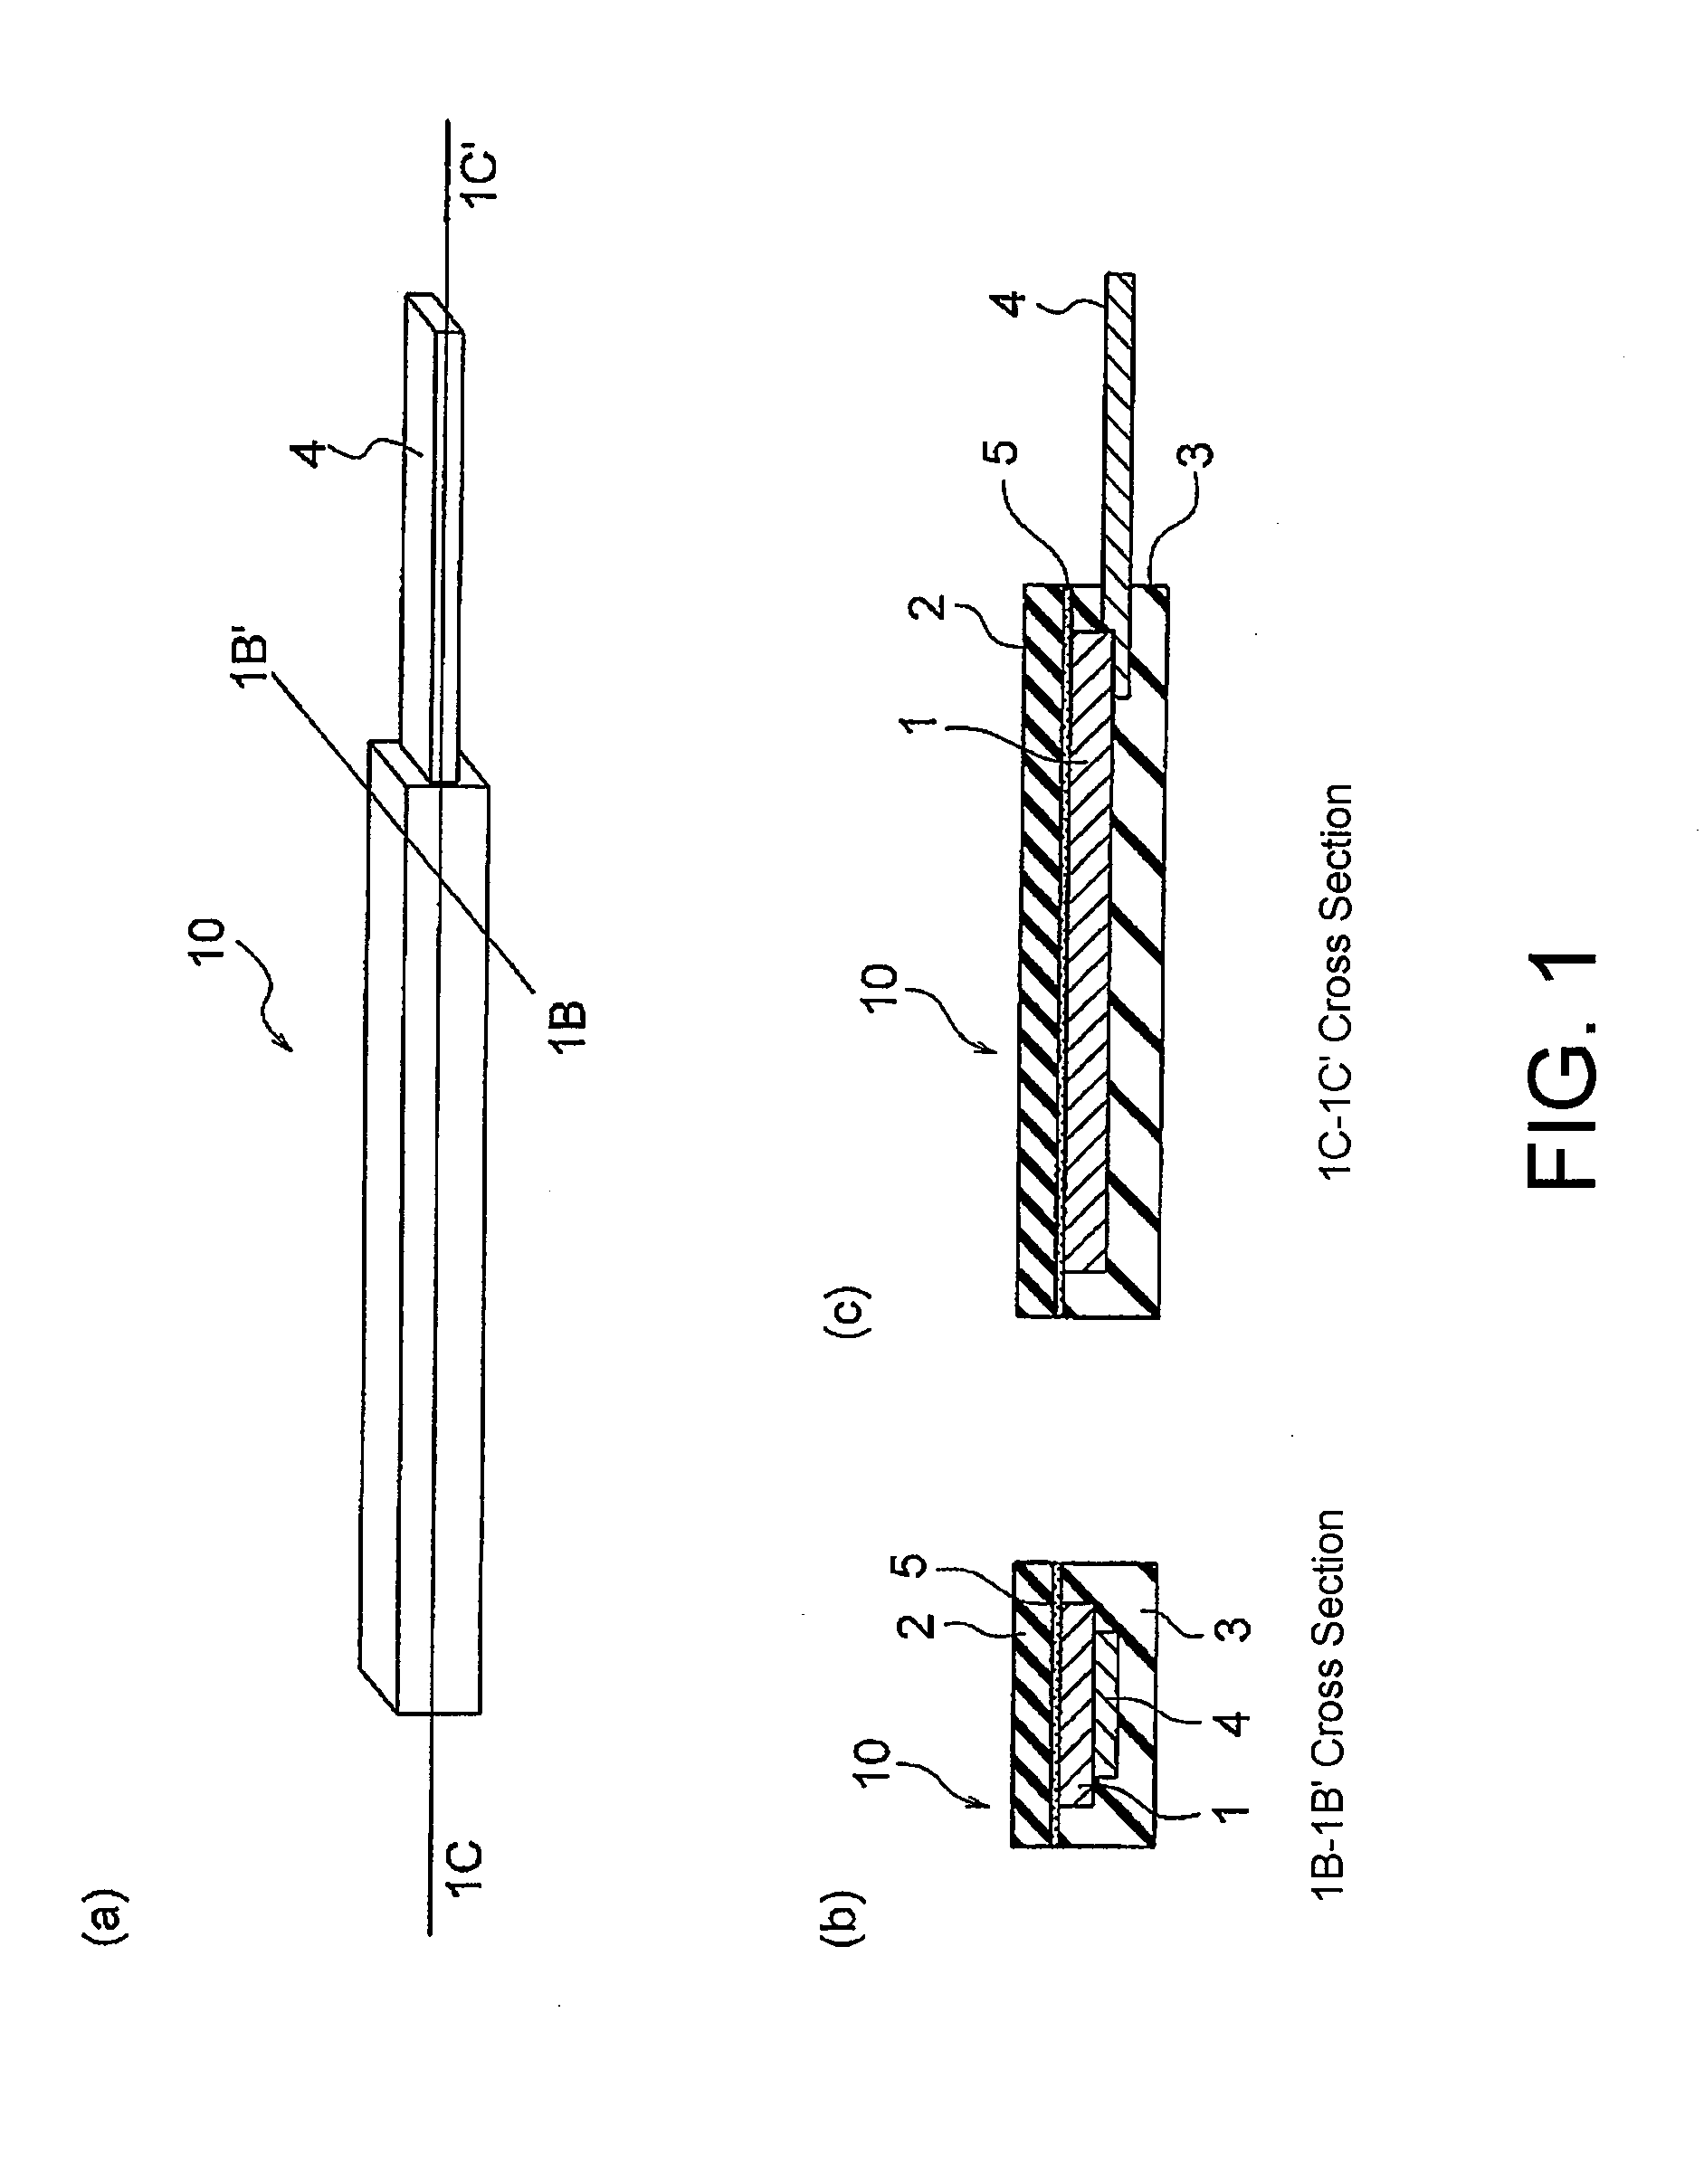 Piezoelectric element, piezoelectric vibration module, and methods of manufacturing the same